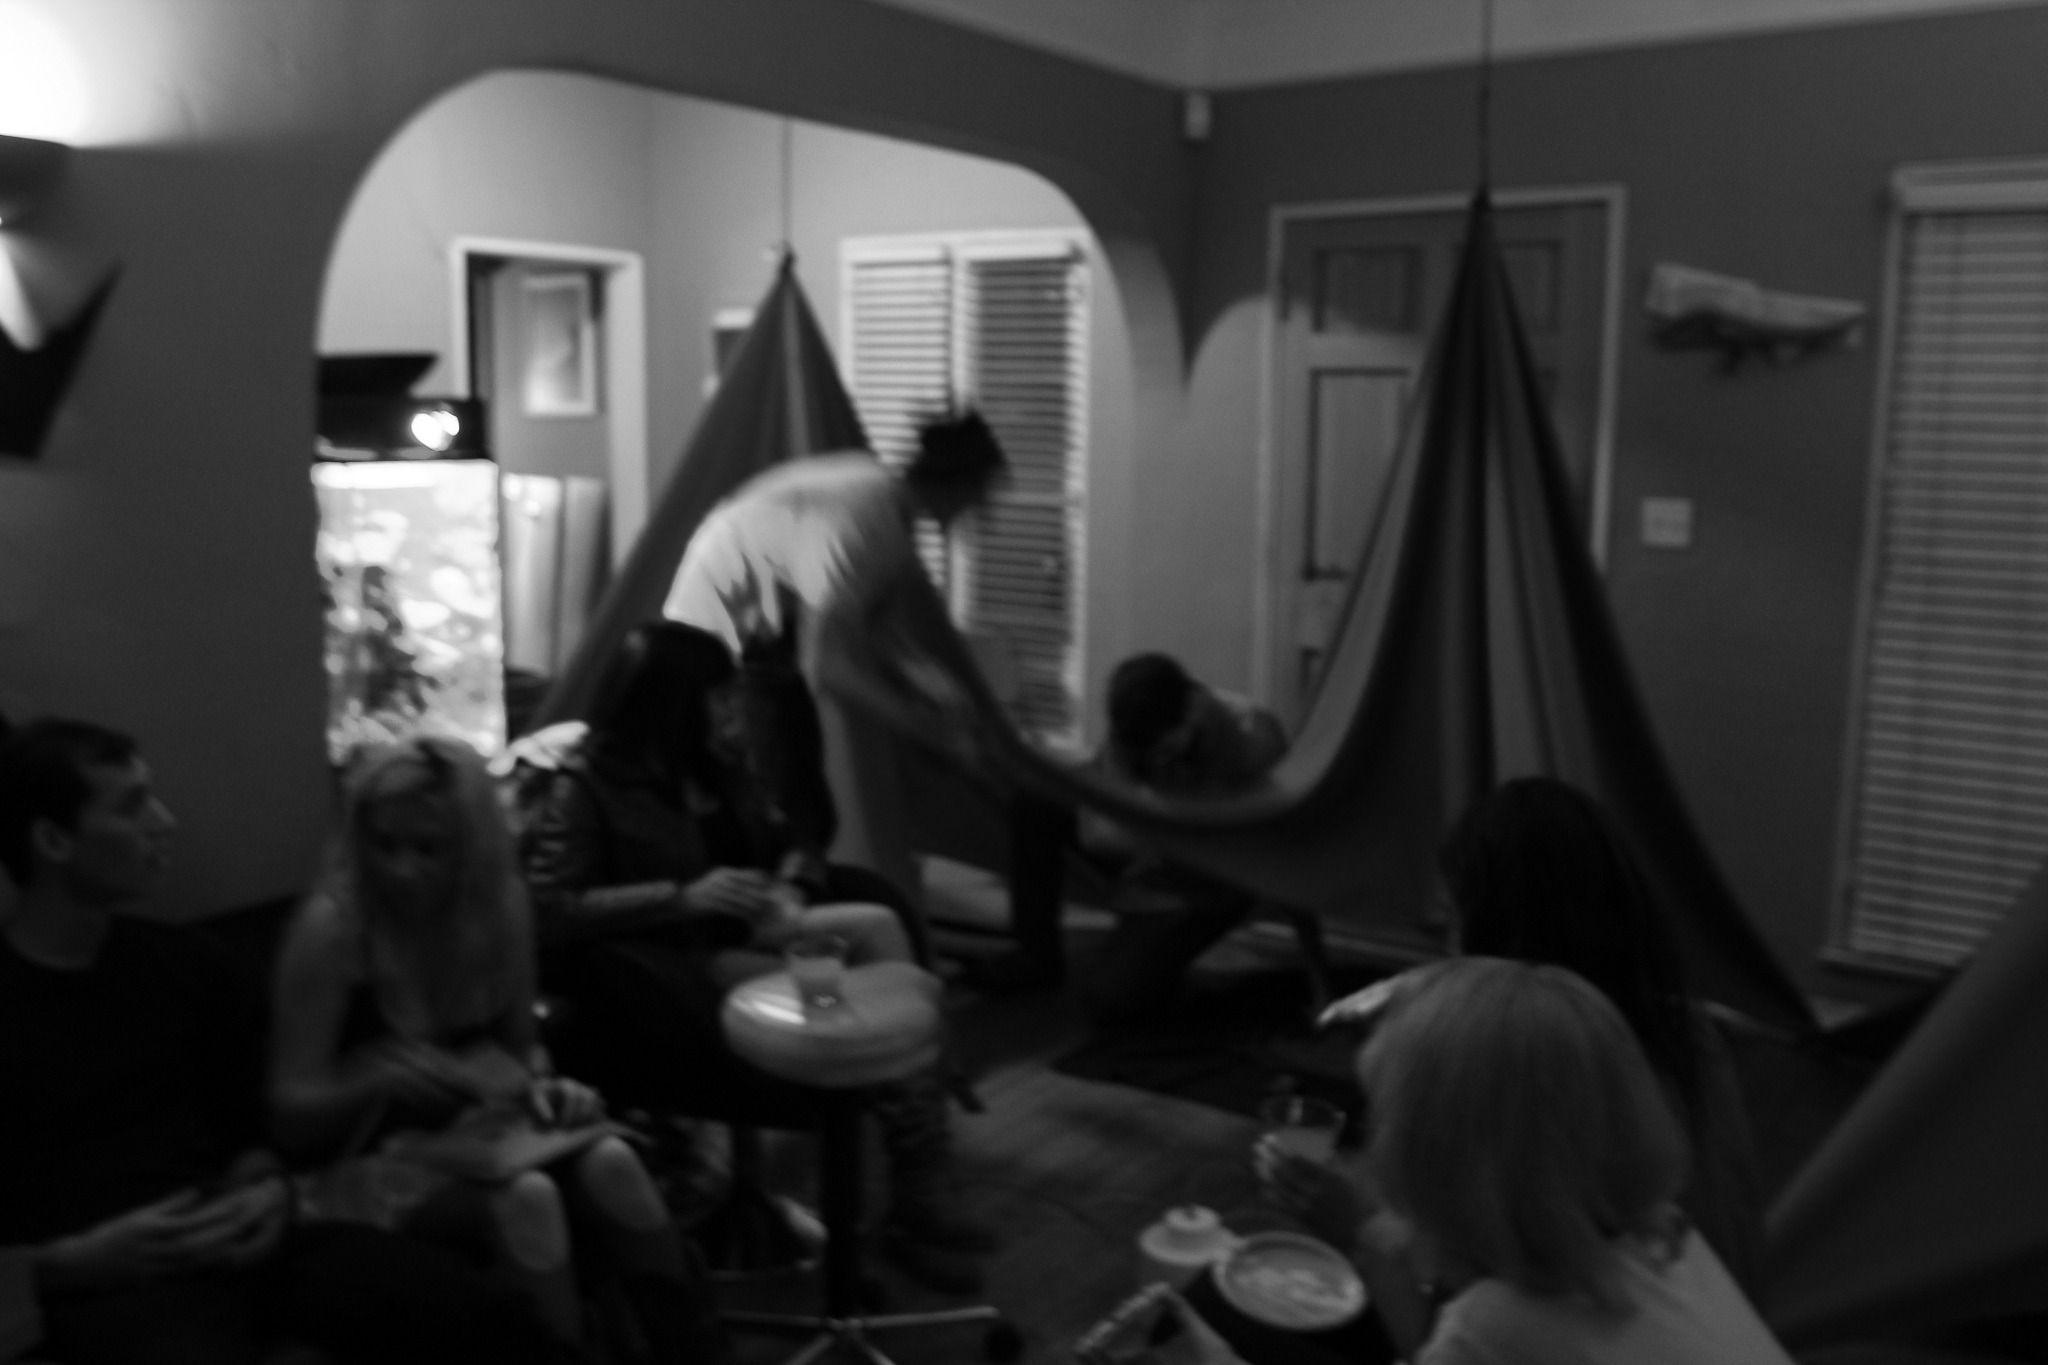 This is a blurry, grayscale photo of people inside a small room sitting and talking to each other. In the background there are two tents.